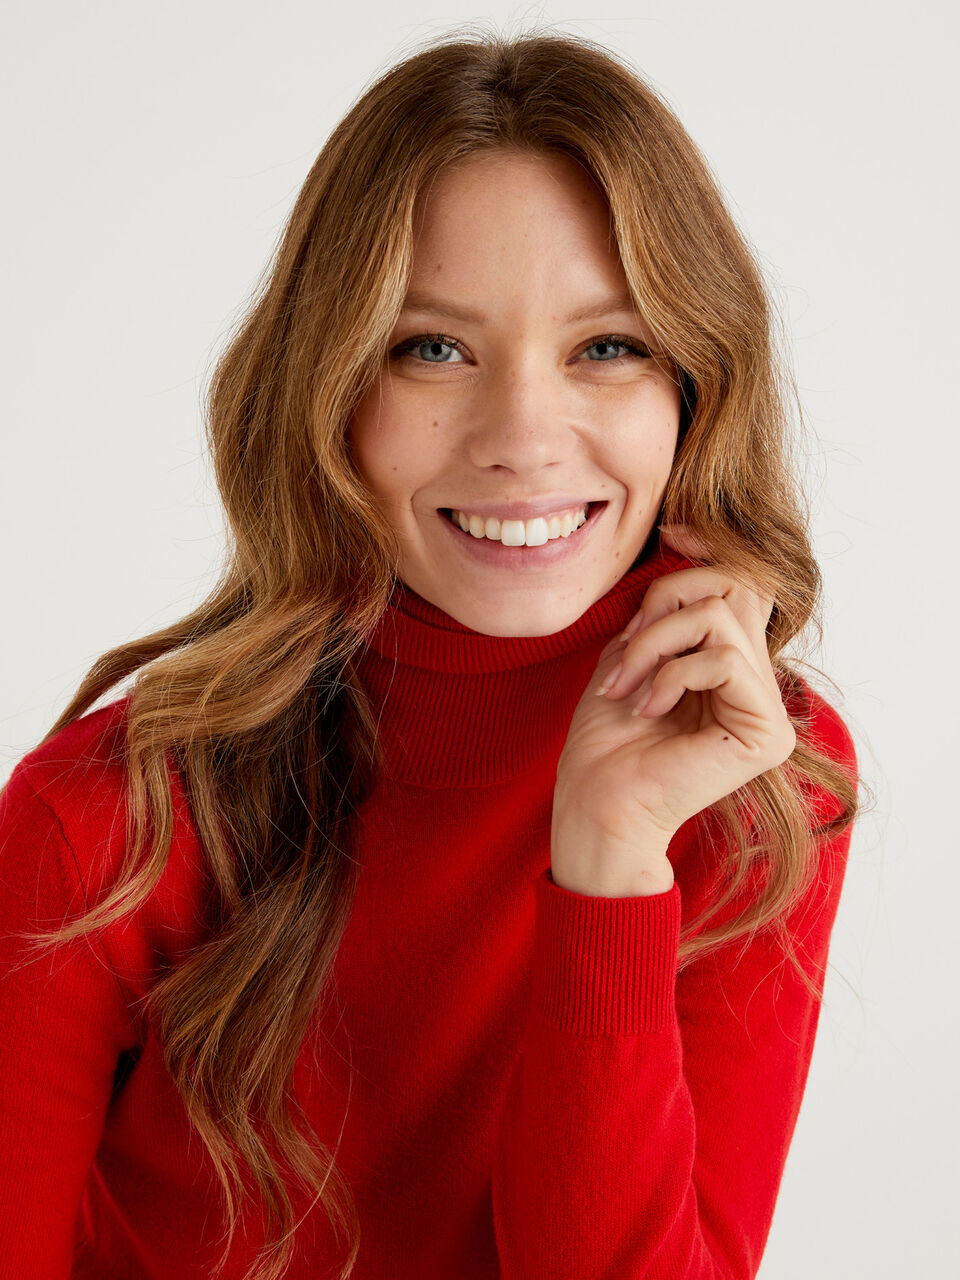 Red turtleneck in pure Merino wool - Red